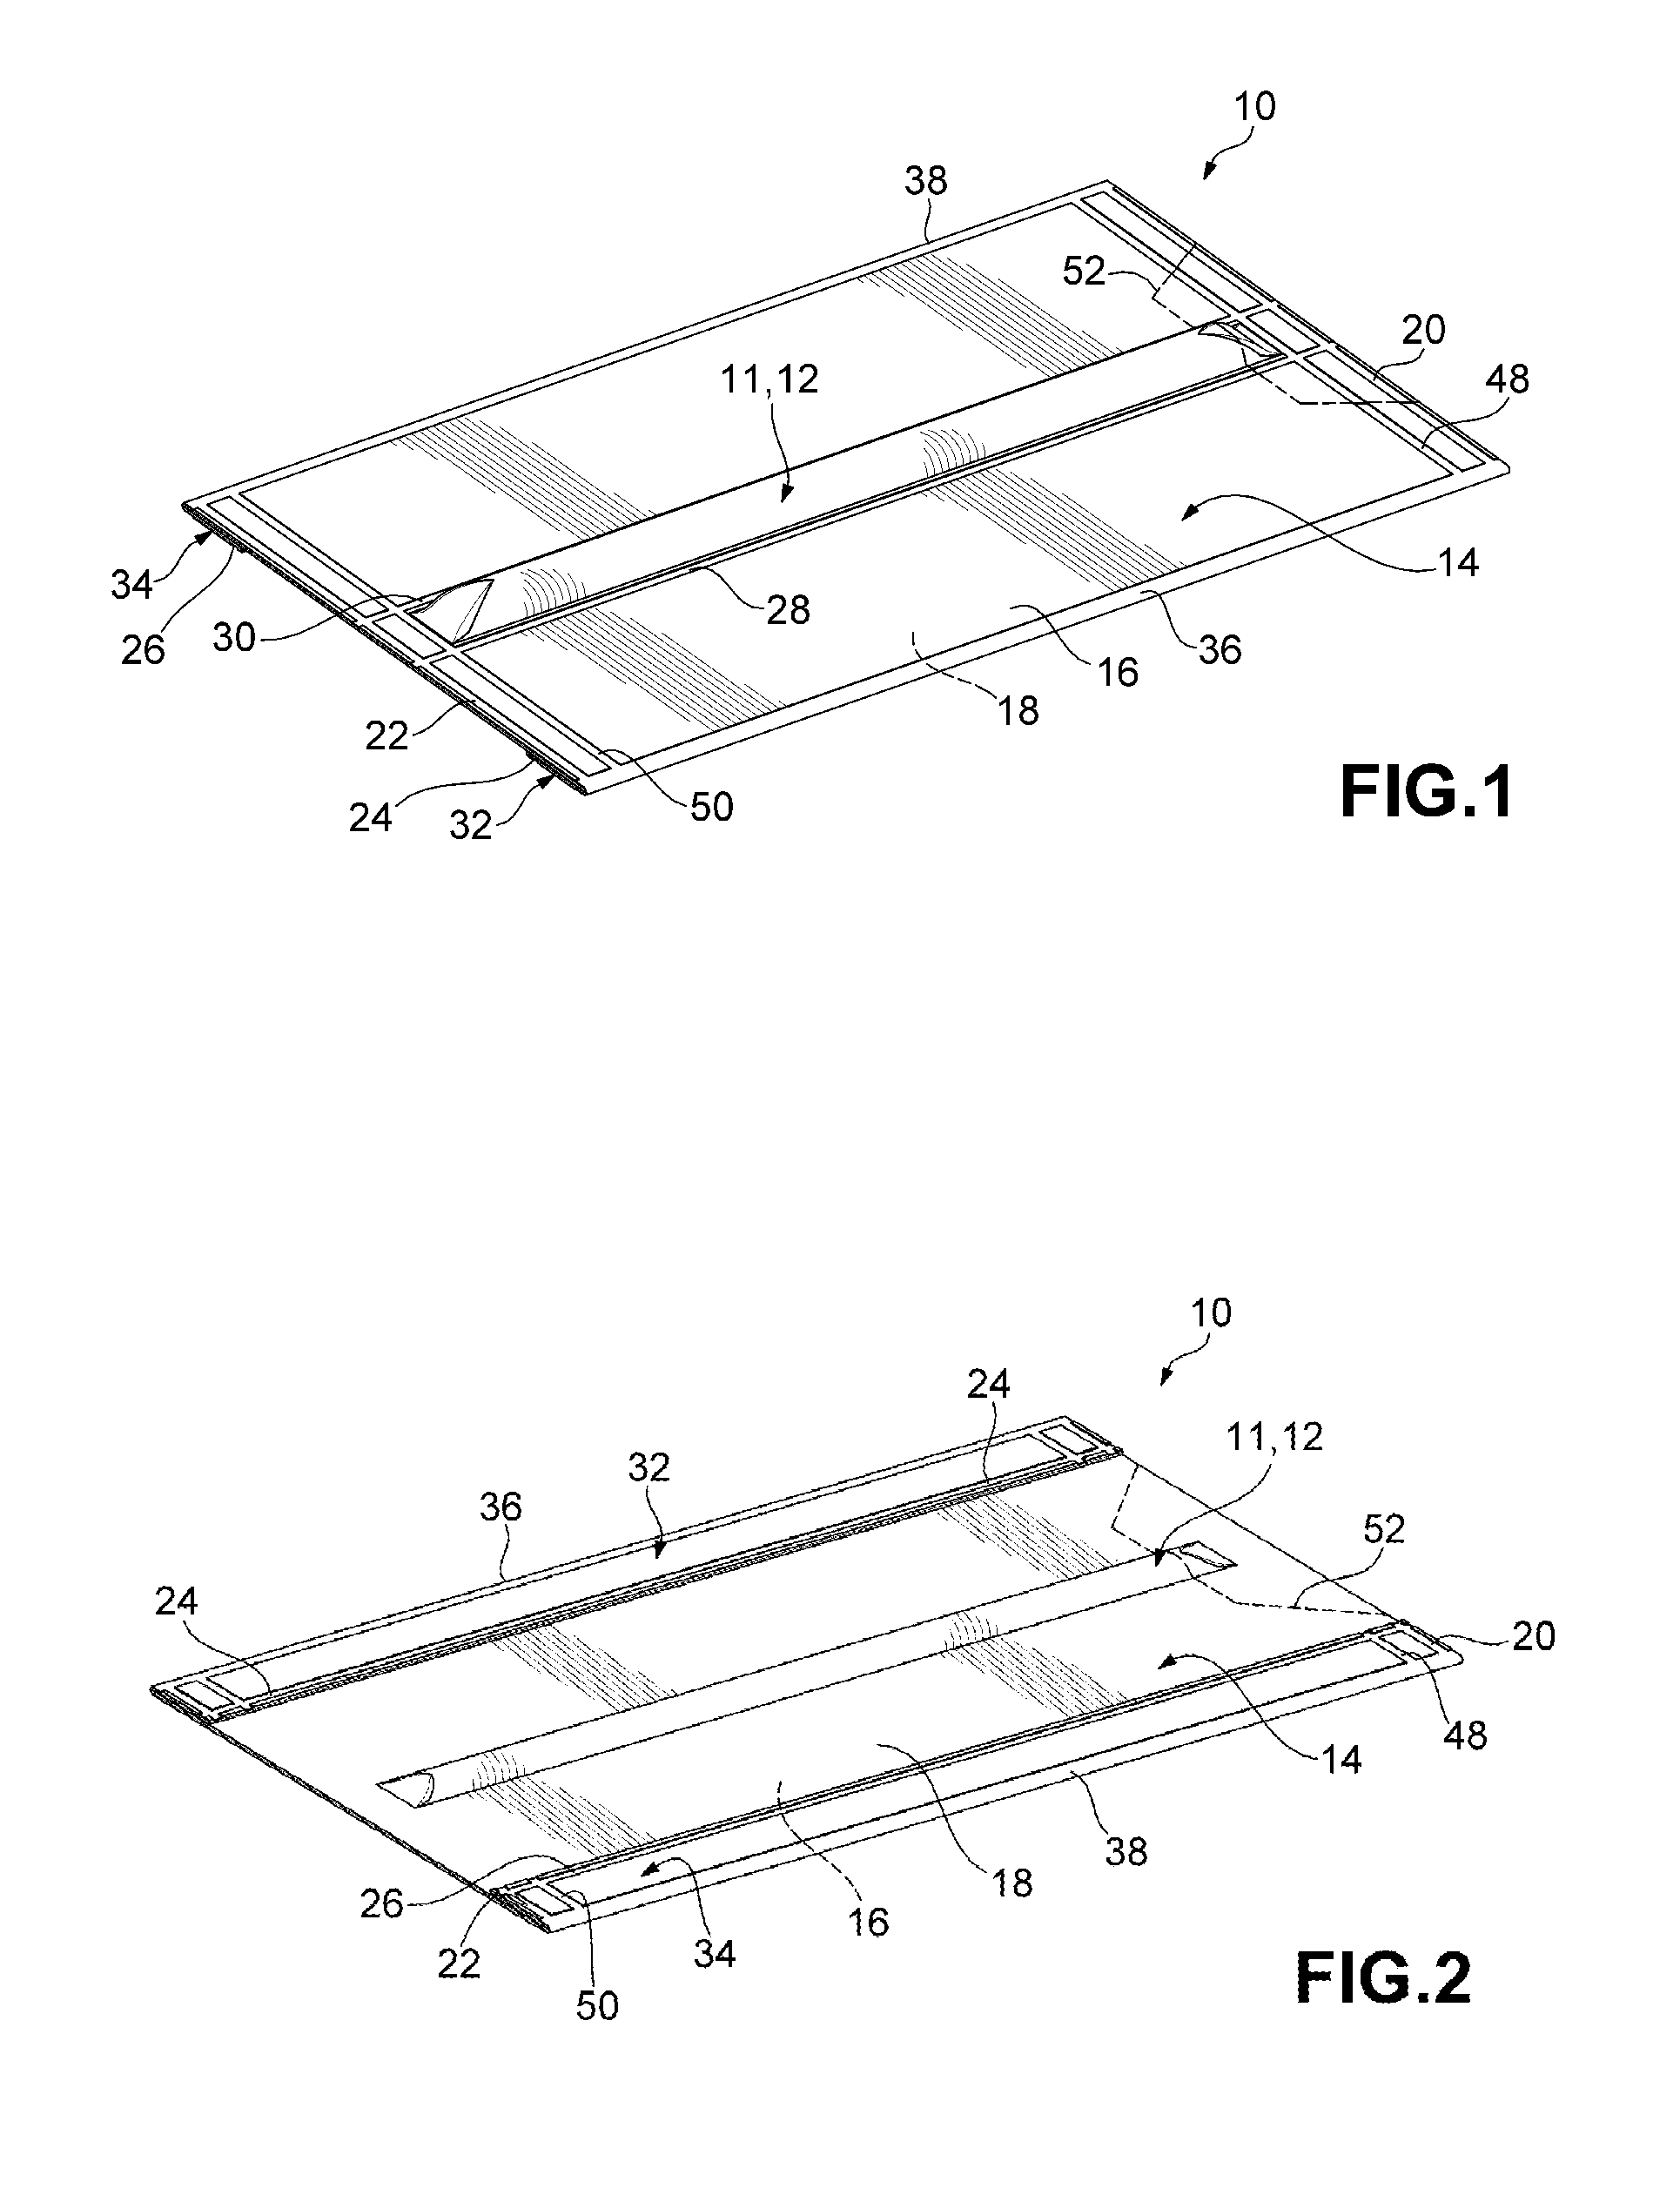 Supply packs and methods and systems for manufacturing supply packs